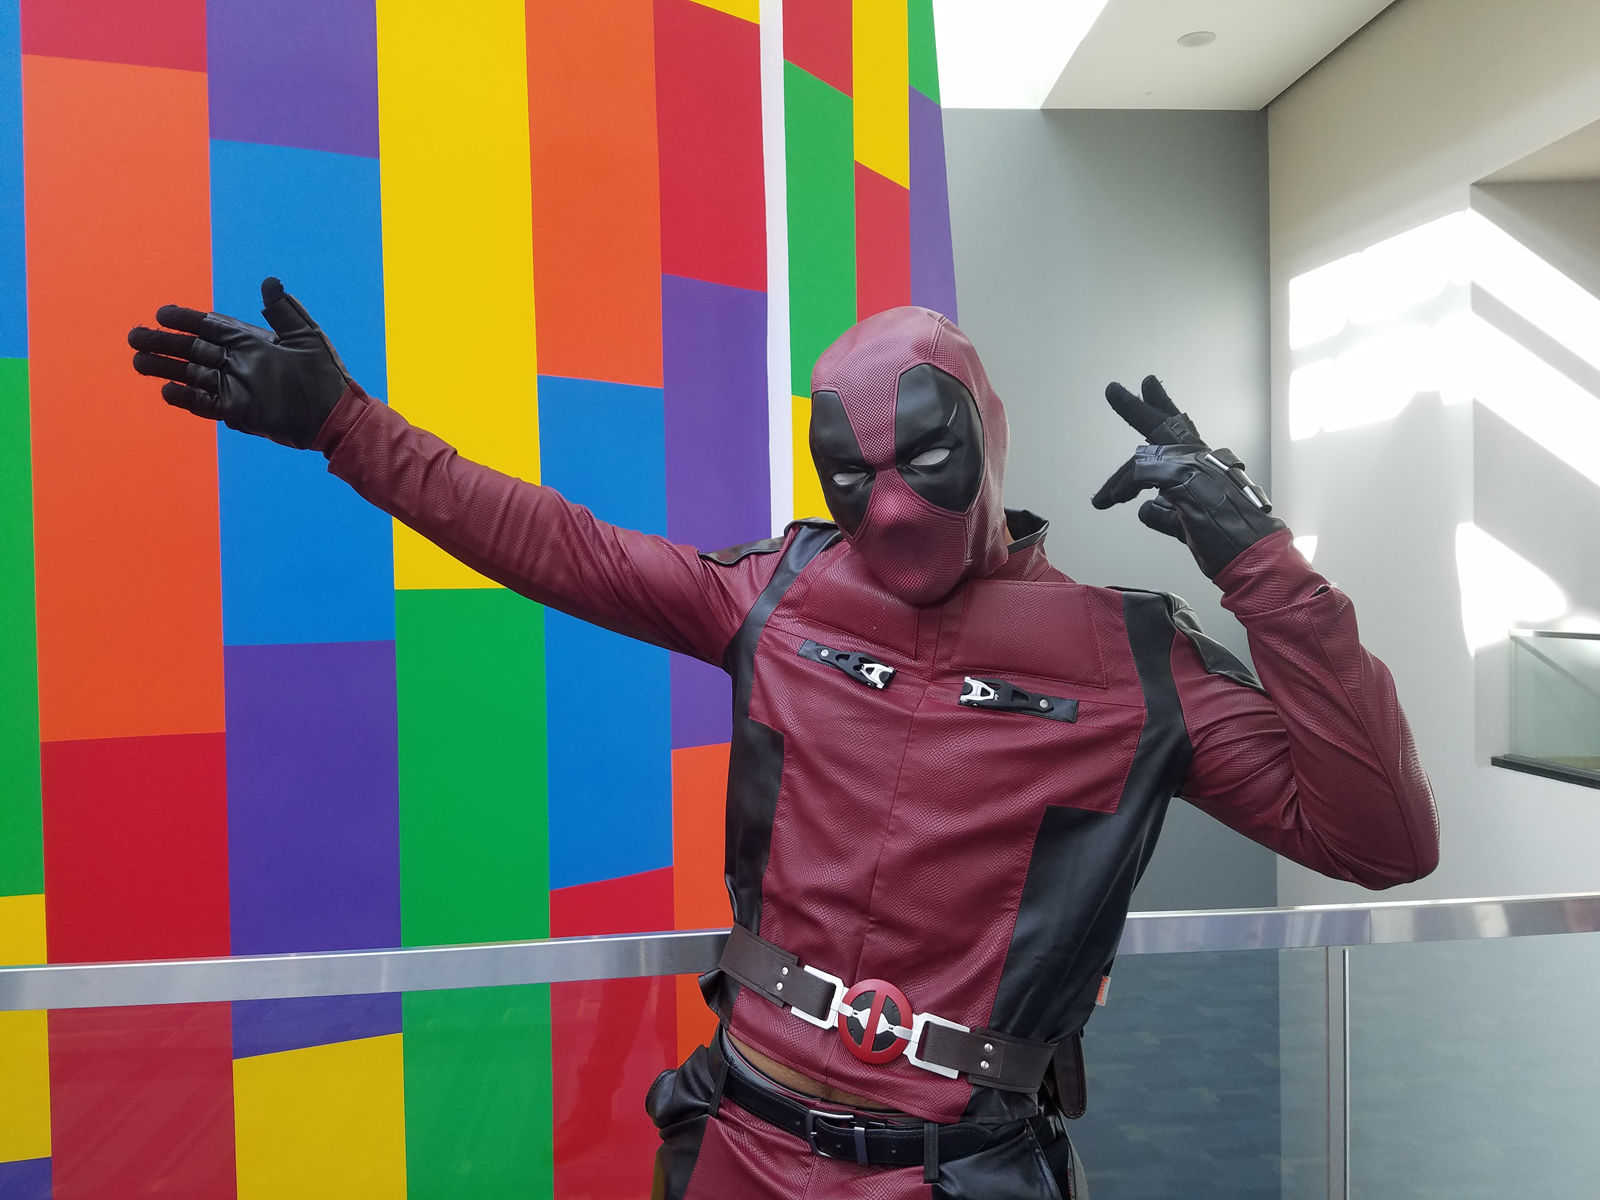 A man dressed as Deadpool at the D.C. Awesome. (WTOP/Will Vitka)